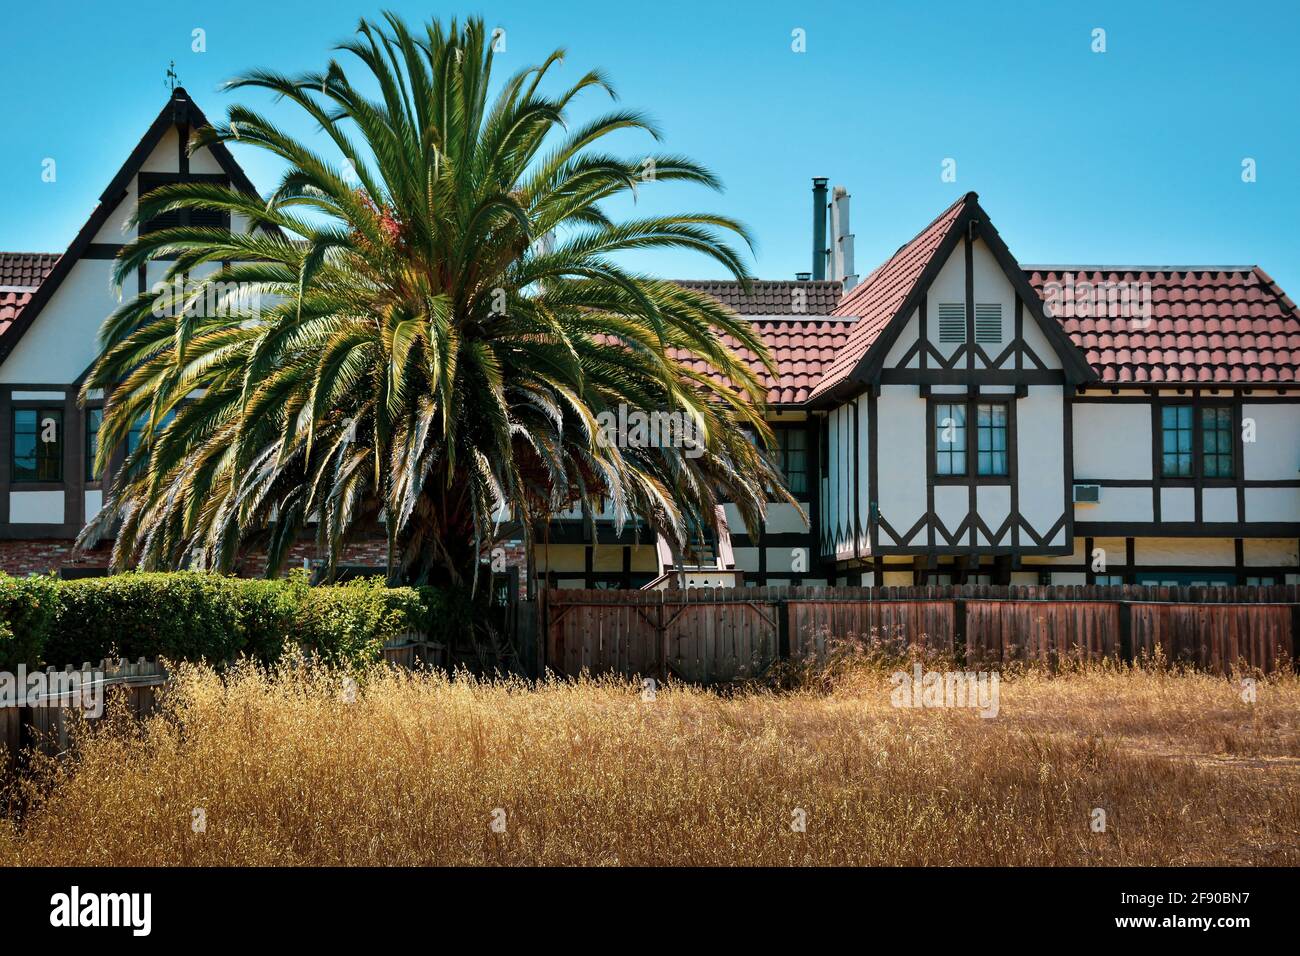 Bavarian style building with tile roof and mock half timbering, accented by a bountiful palm tree, beyond a dry grass field in Solvang, CA, Stock Photo